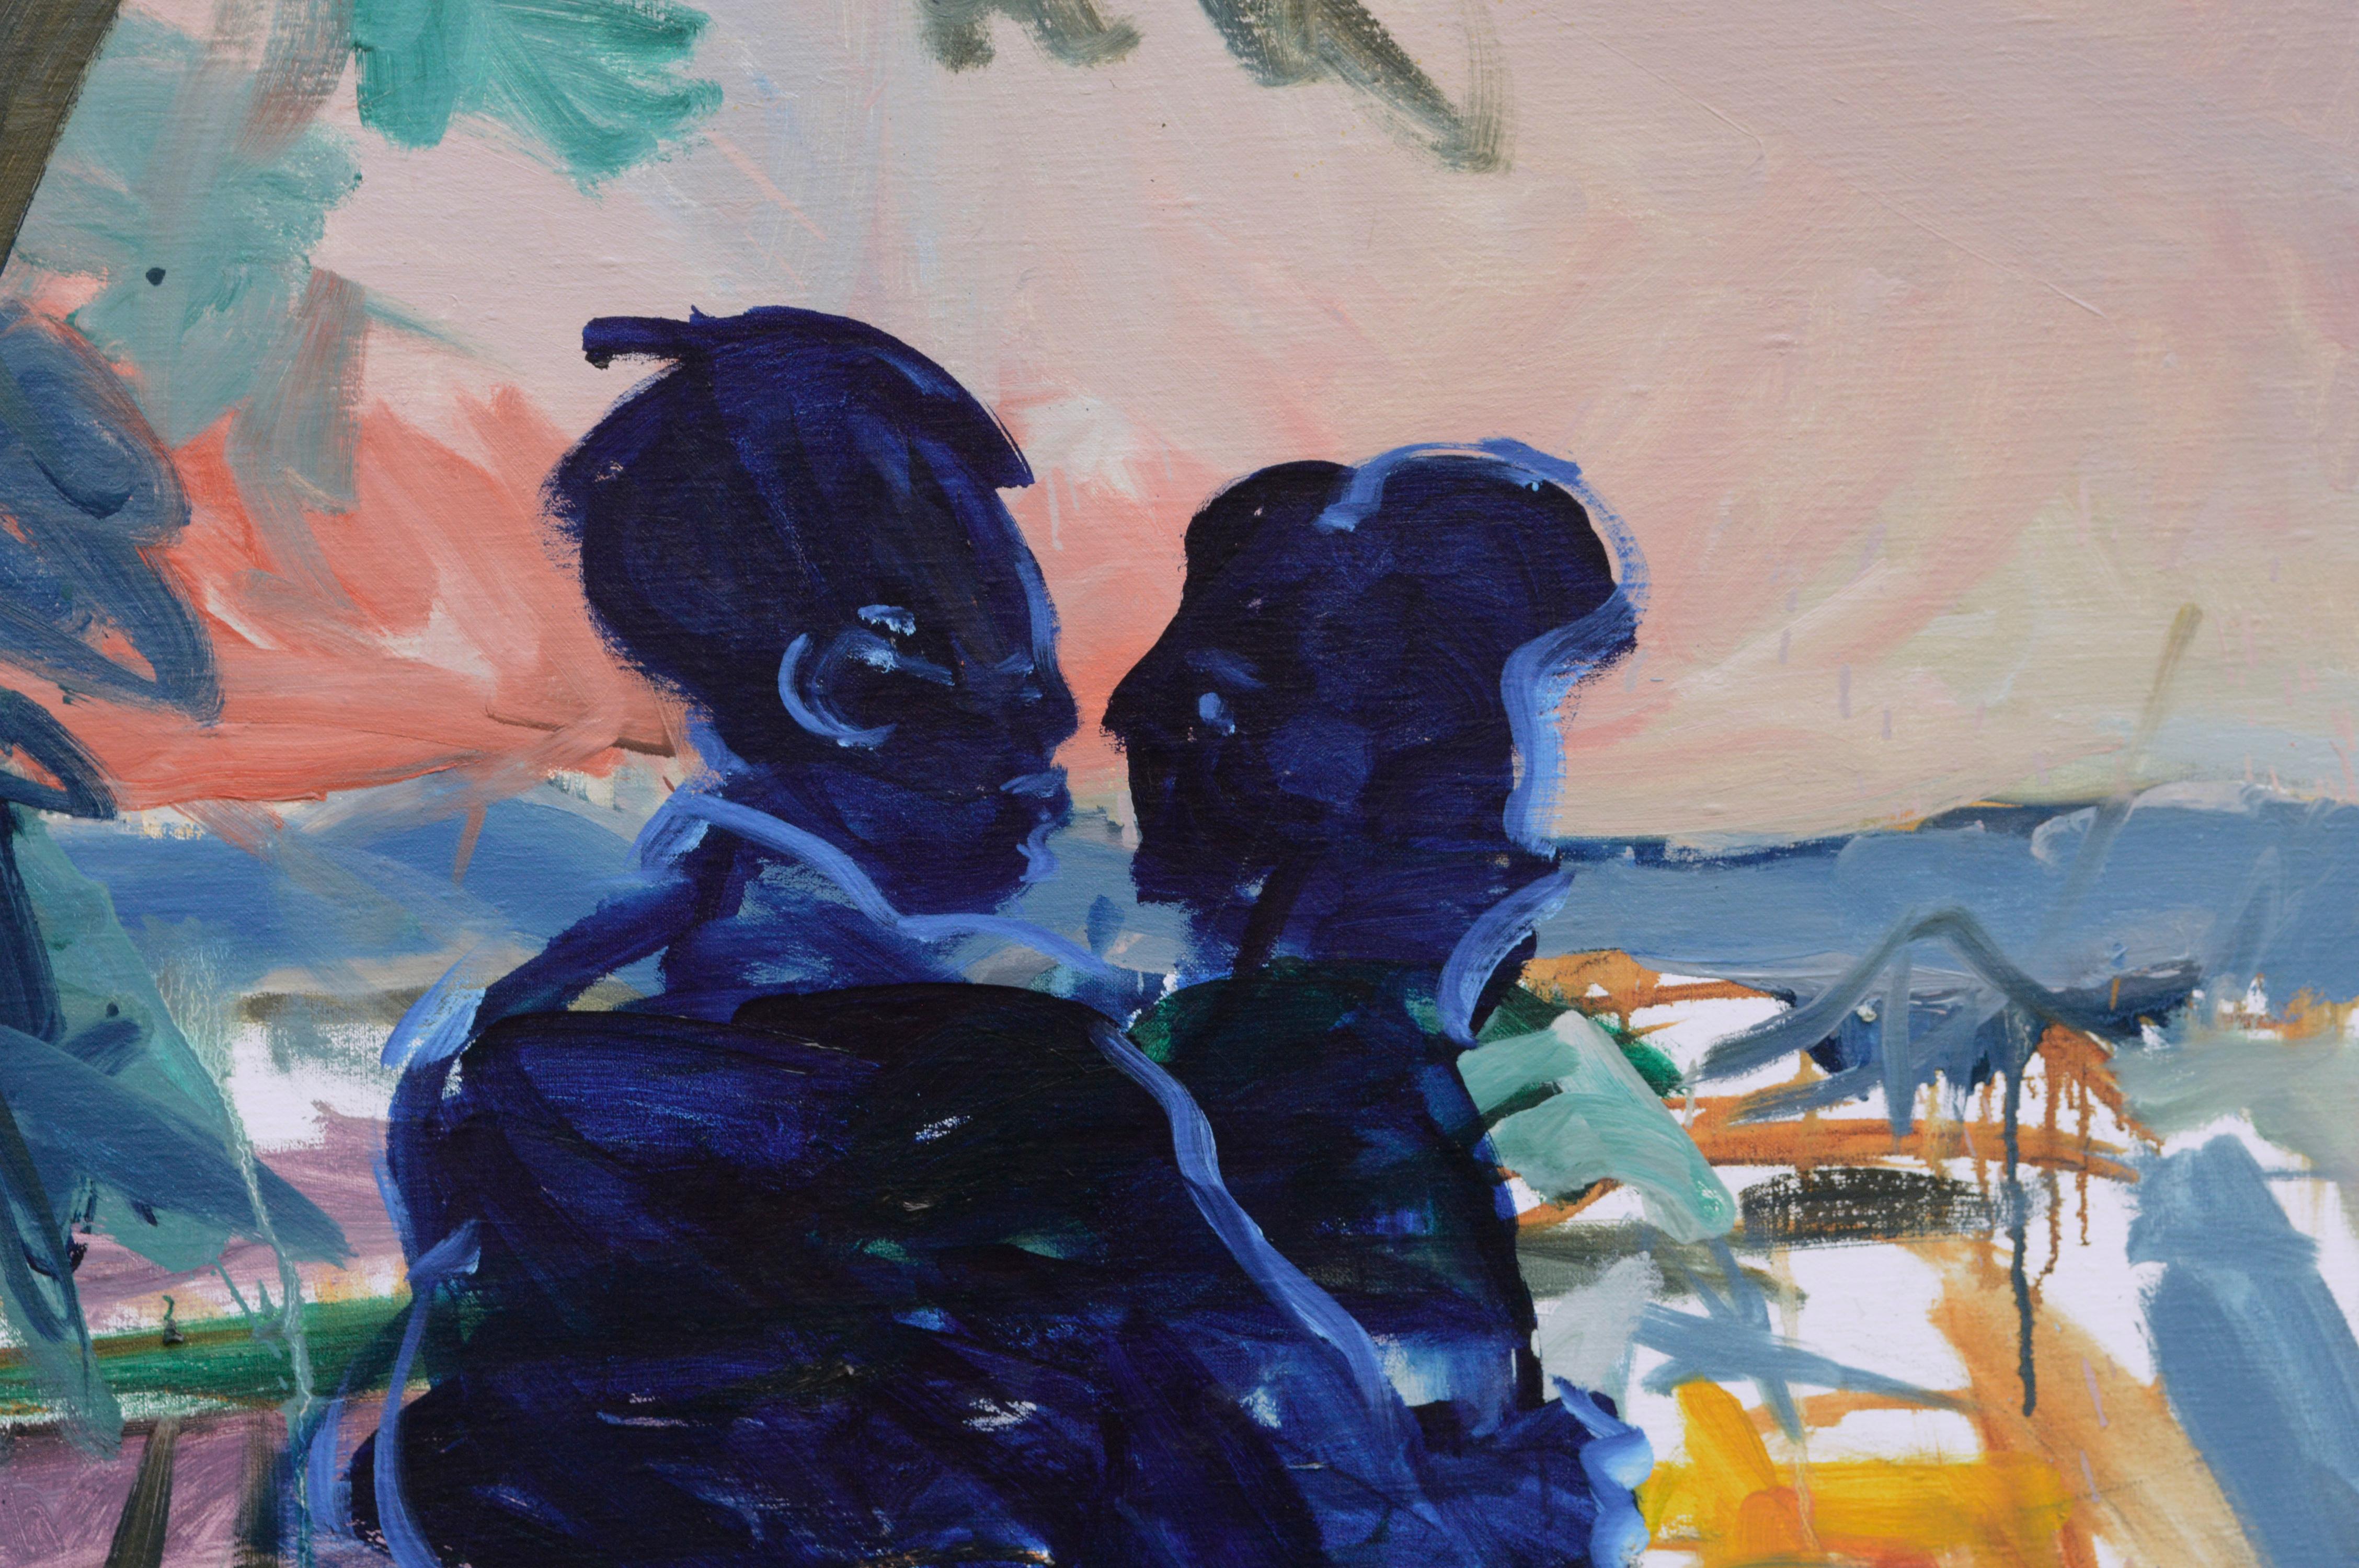 Couple Dancing at Sunset - Bay Area Figurative School  - Painting by Allie William Skelton